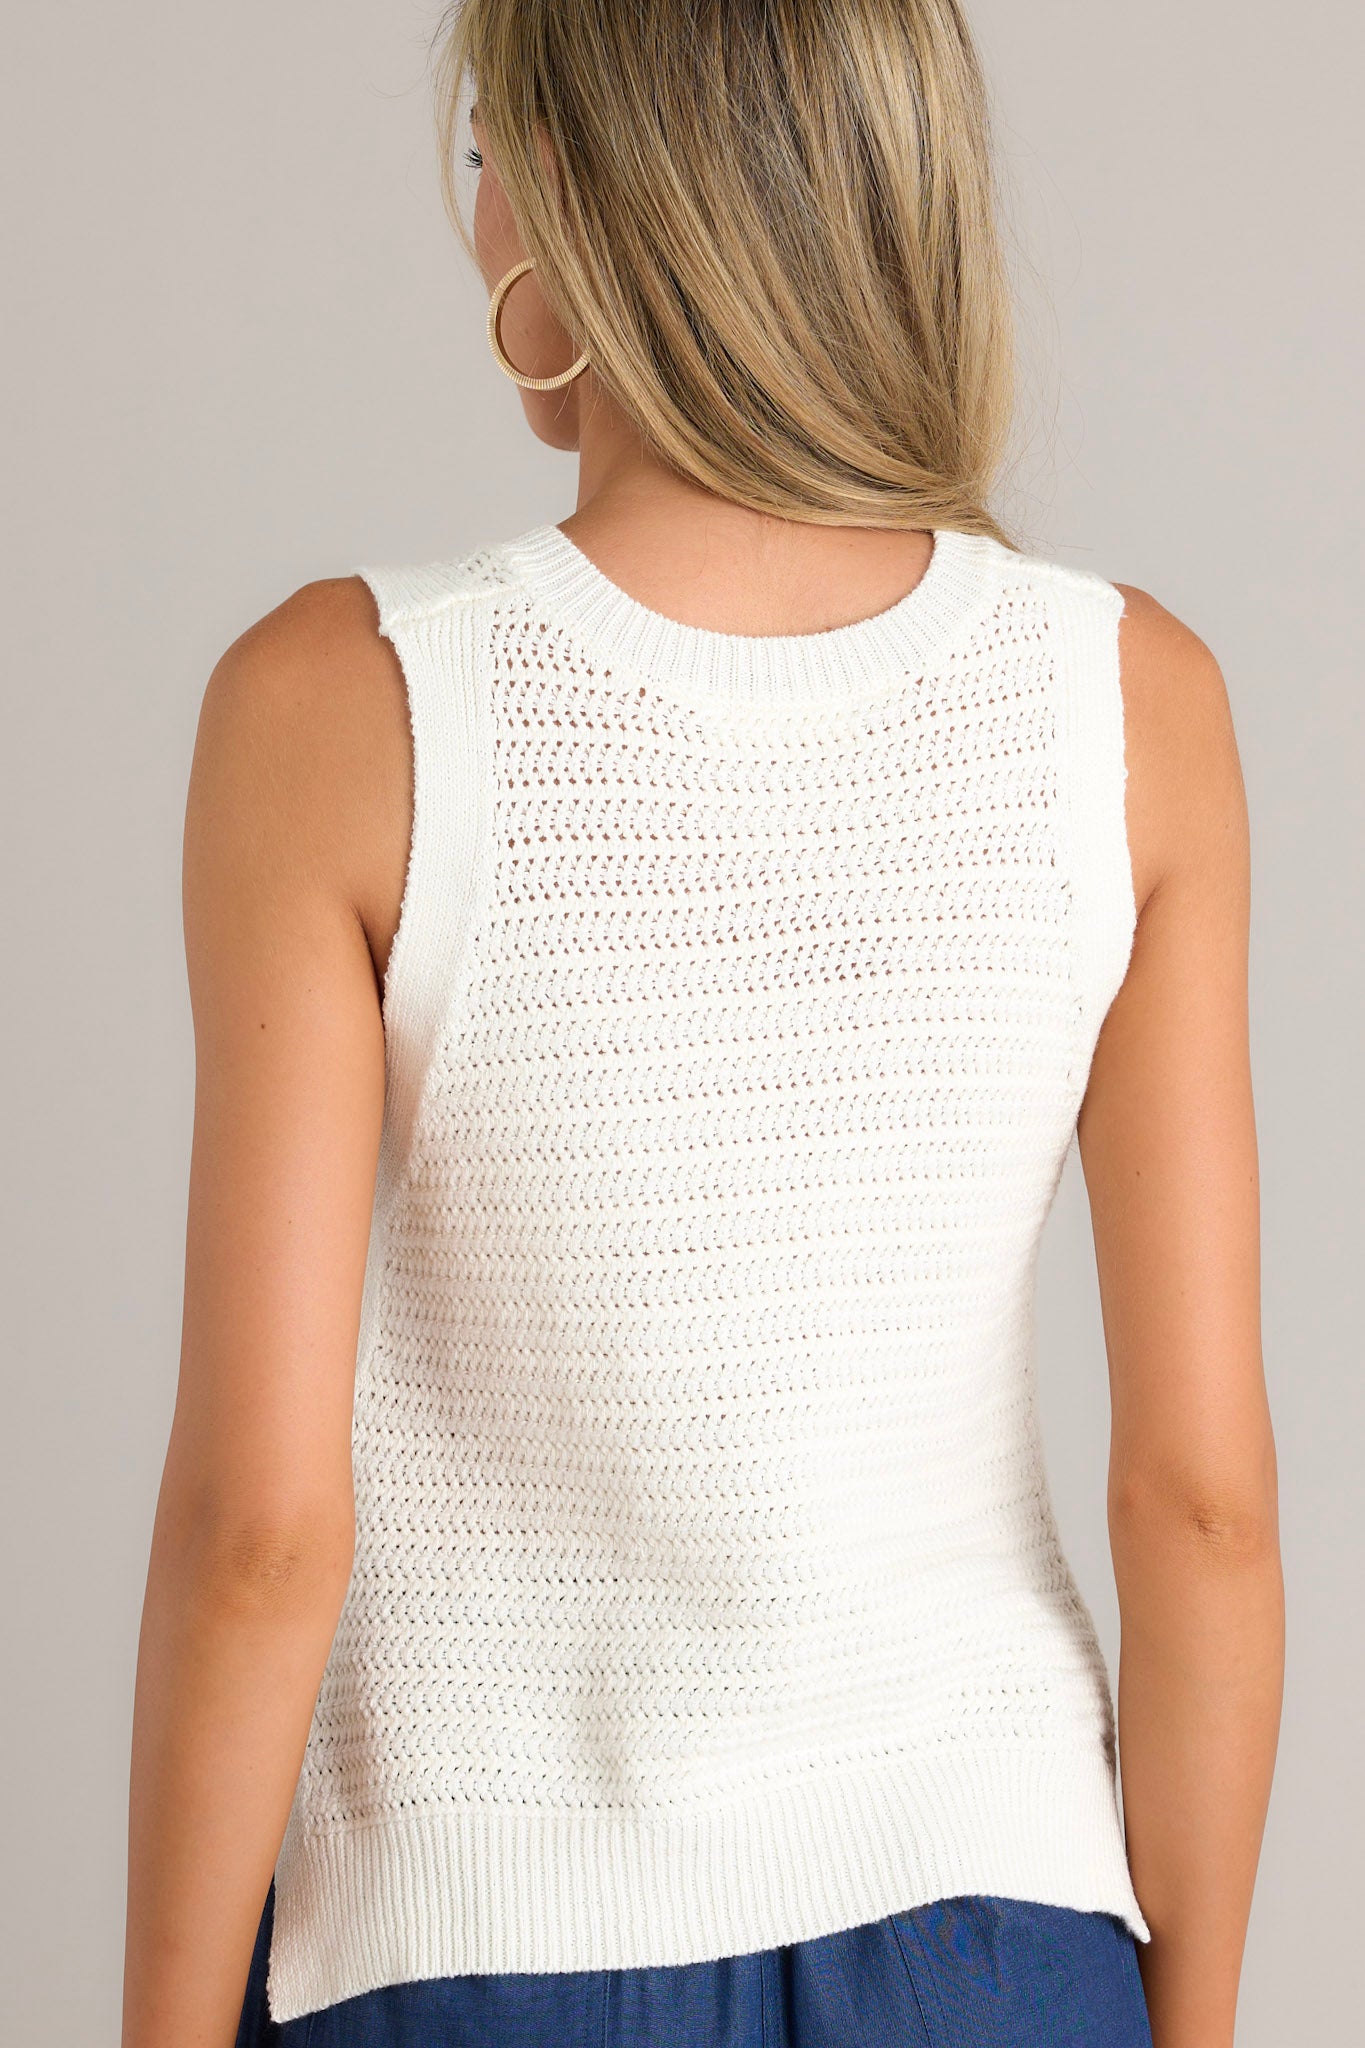 Back view of an ivory top highlighting the knit texture and the cropped length.